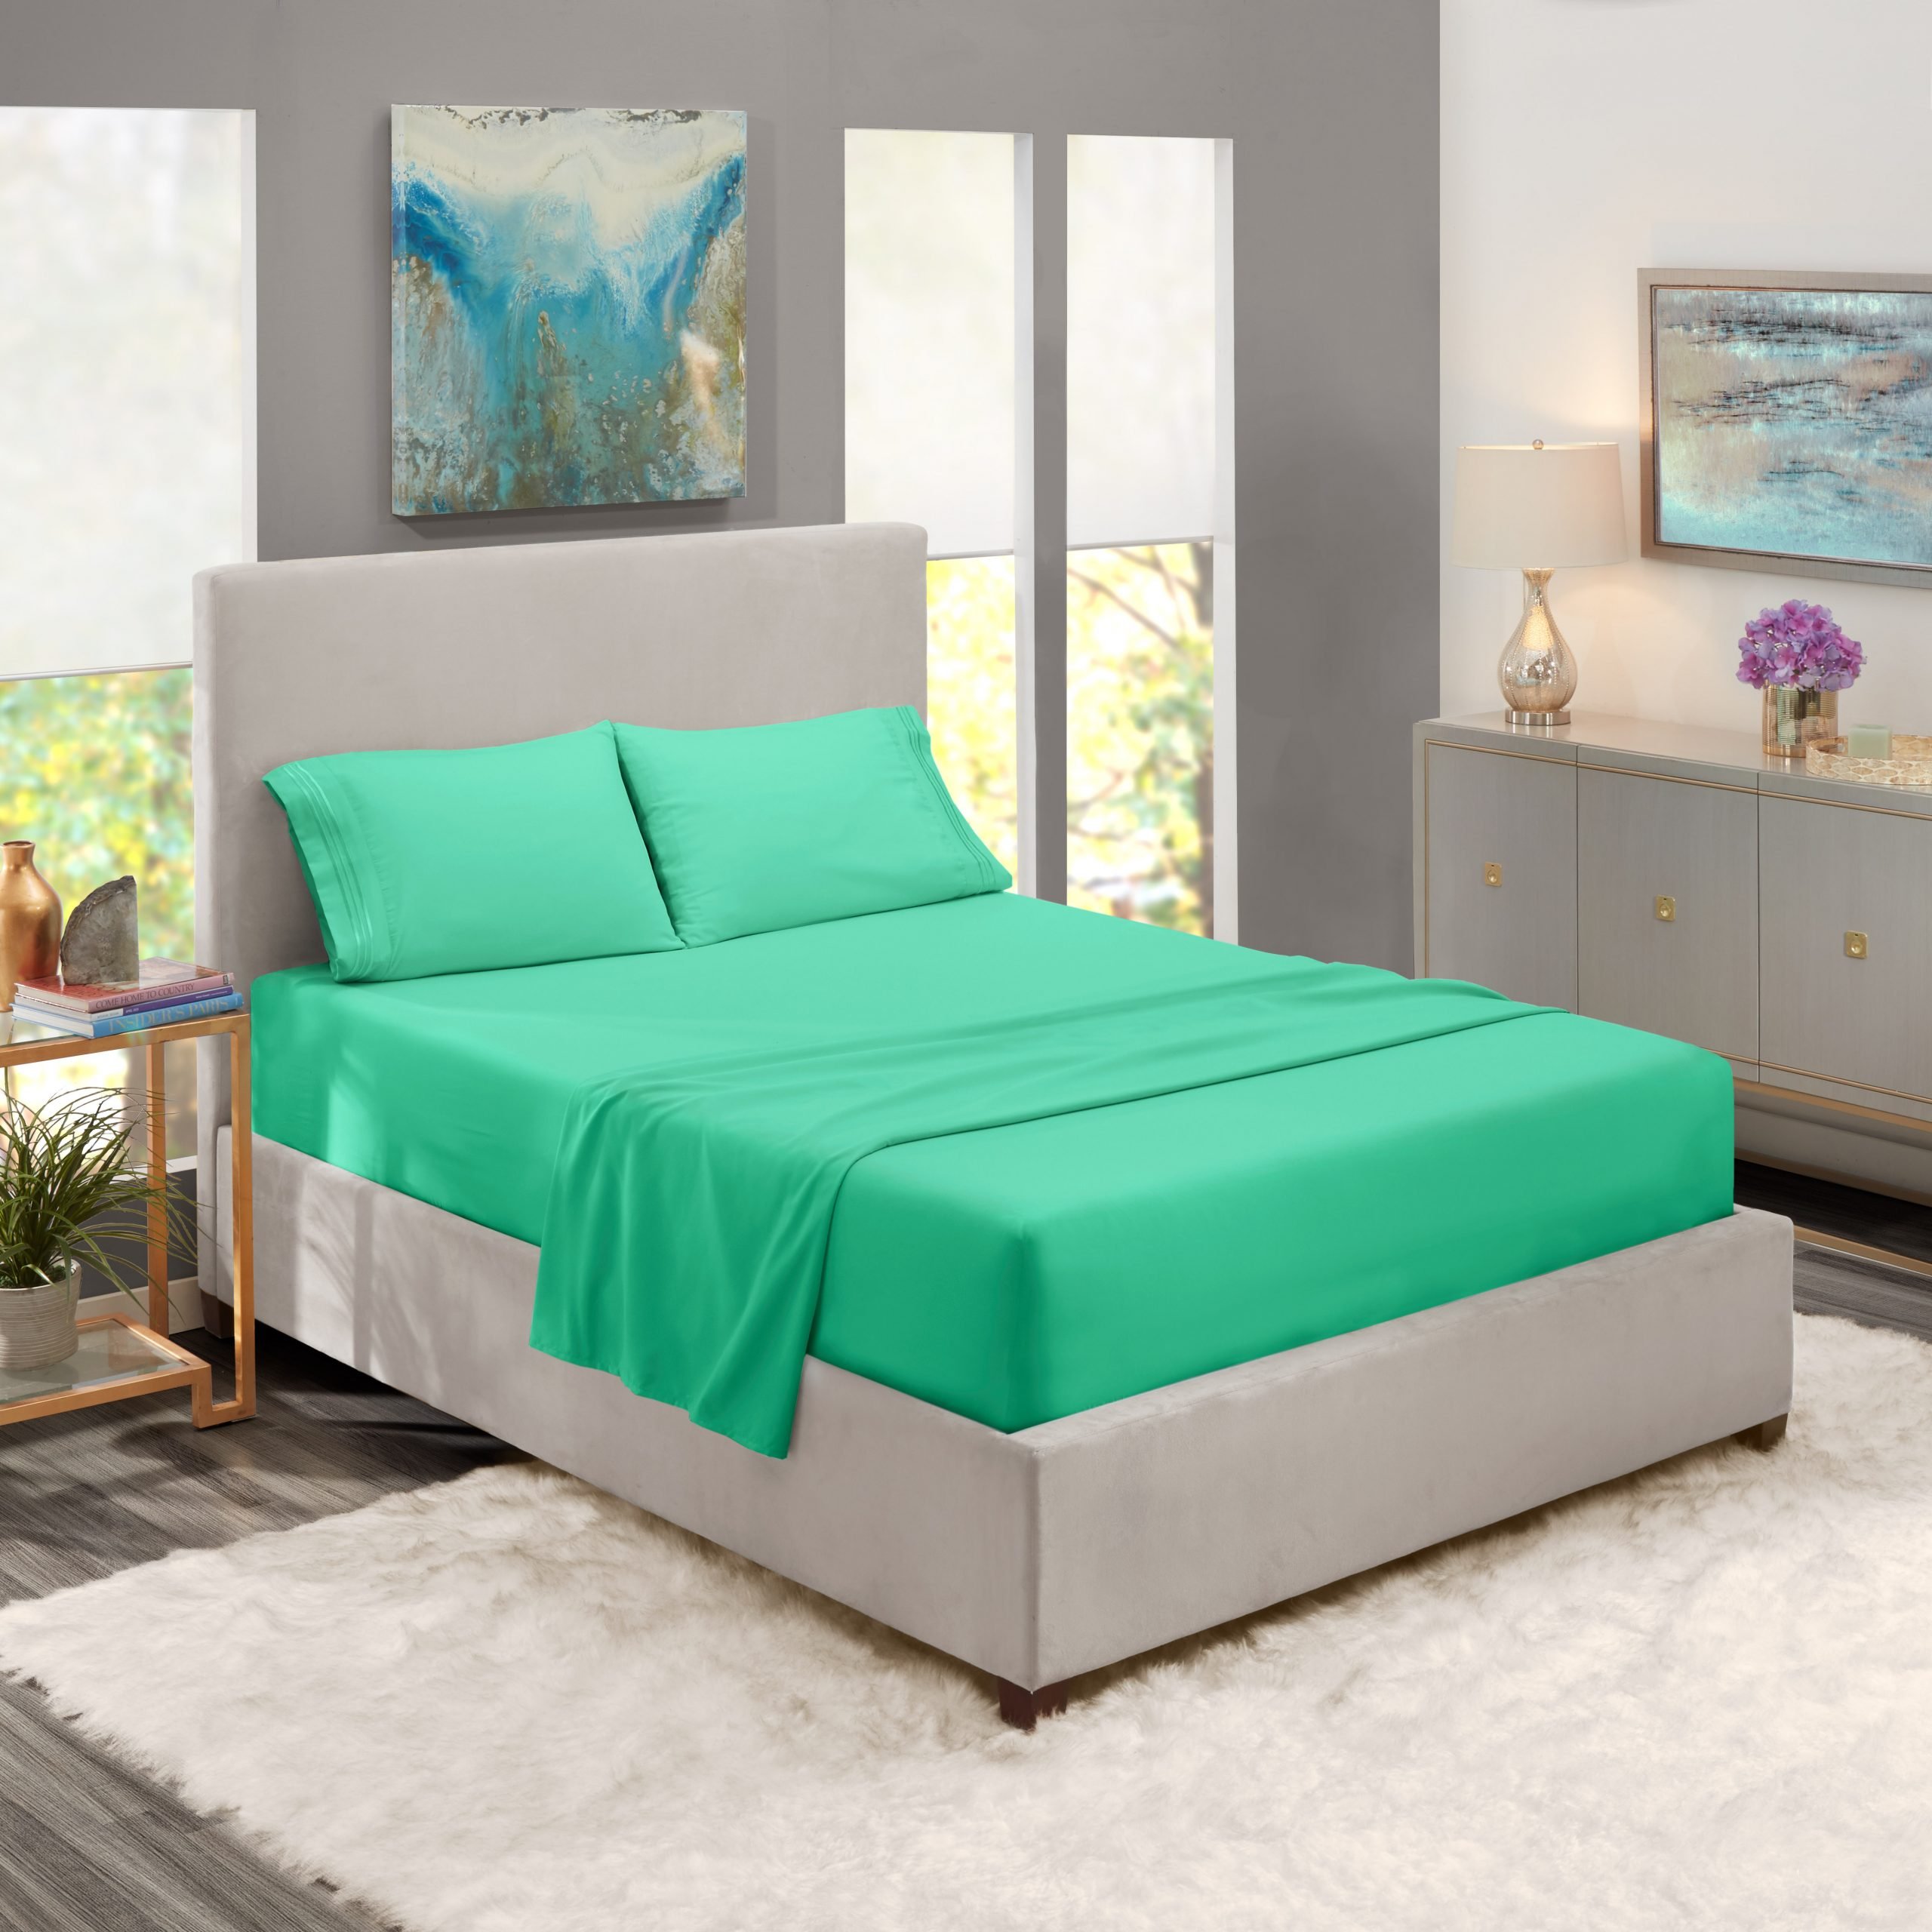 Twin XL Size Bed Sheets Set Mint , Luxury Bedding Sheets ...